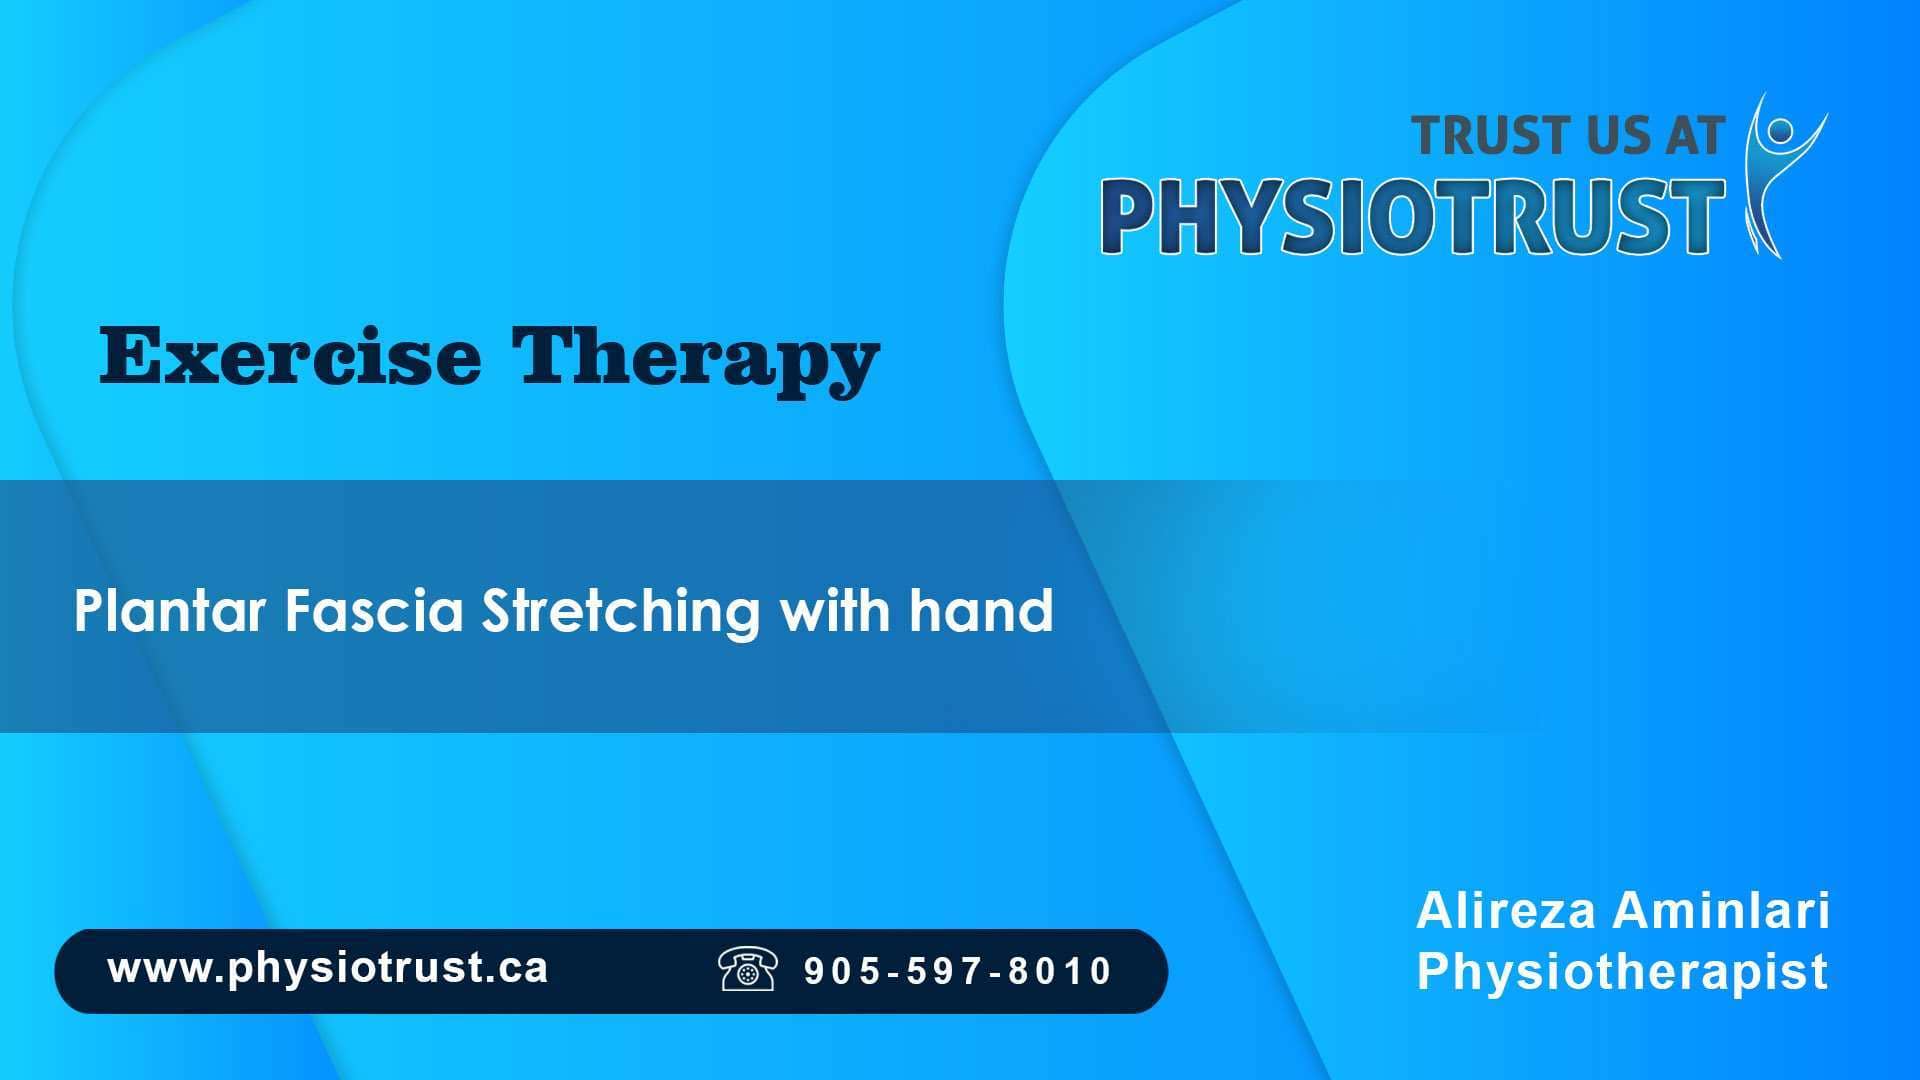 Plantar Fascia Stretching with hand